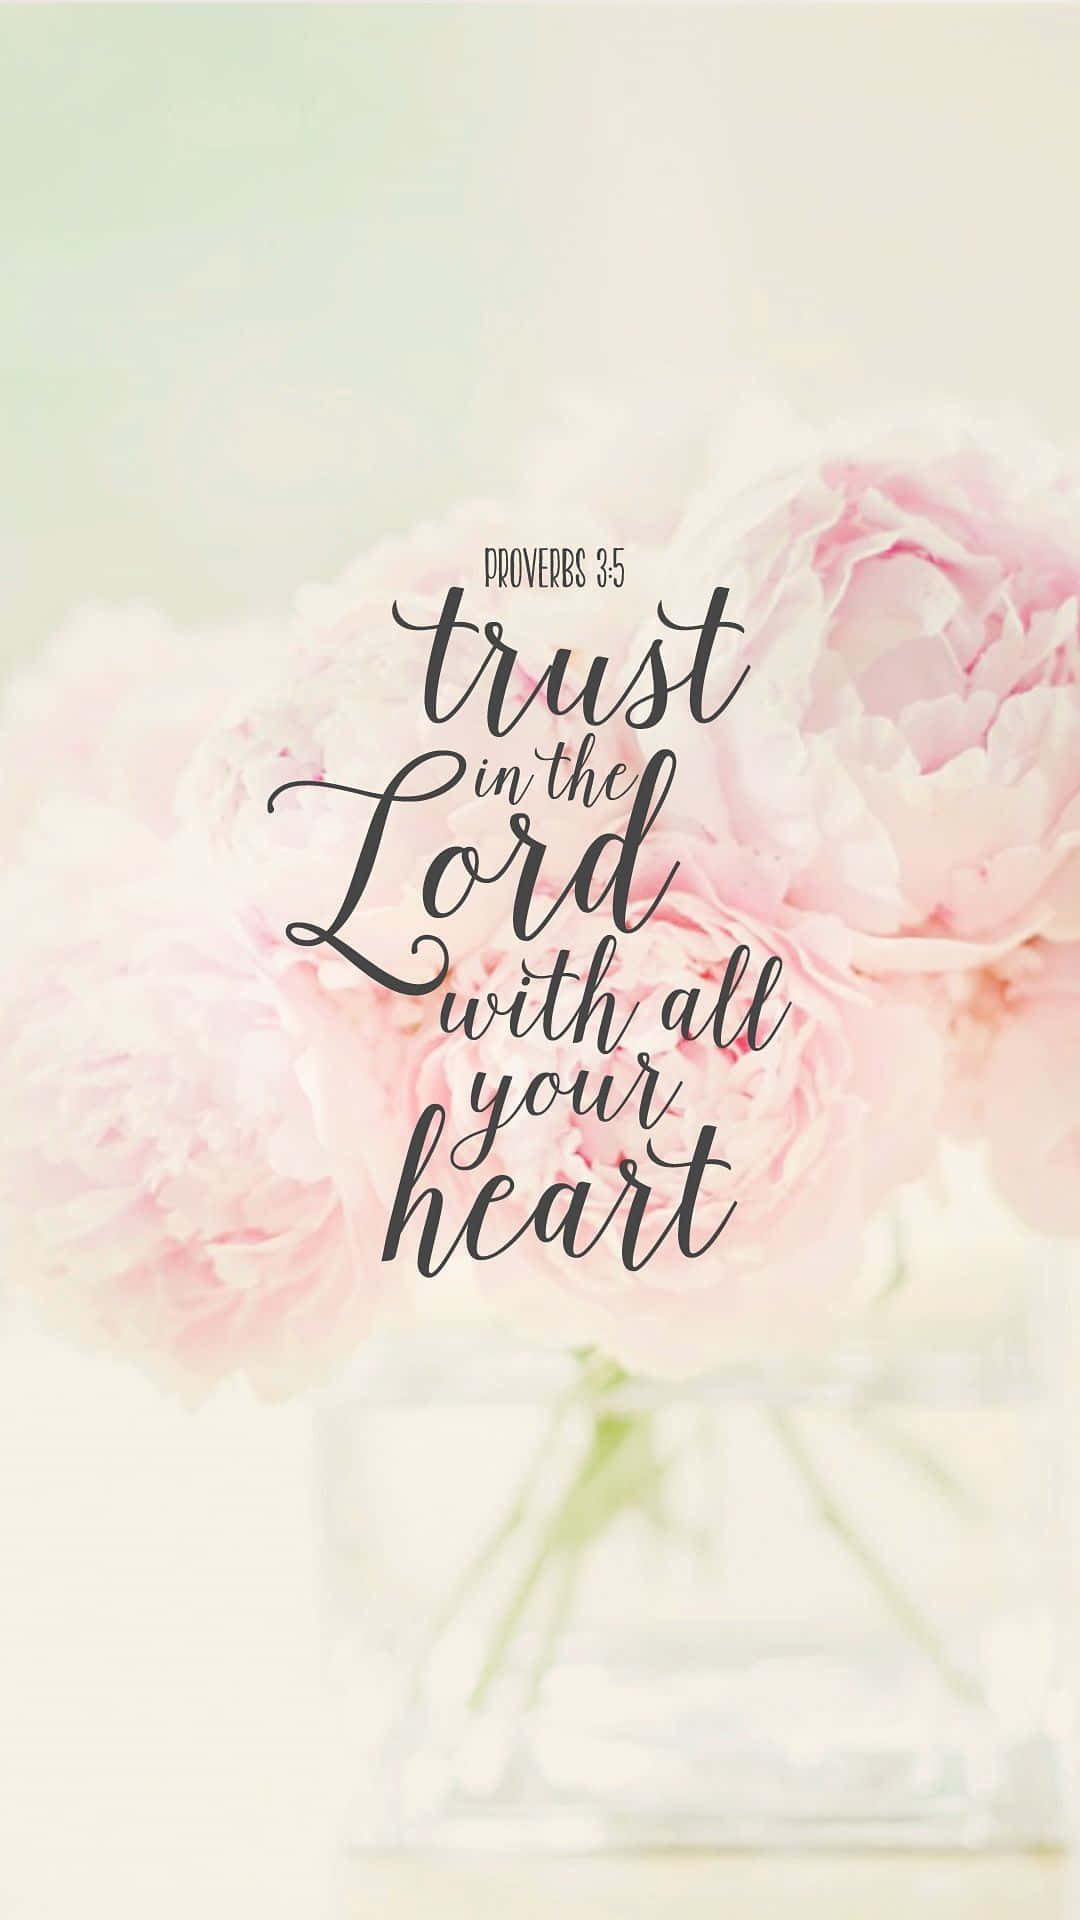 Download Proverbs 3:5 Girly Christian Wallpaper